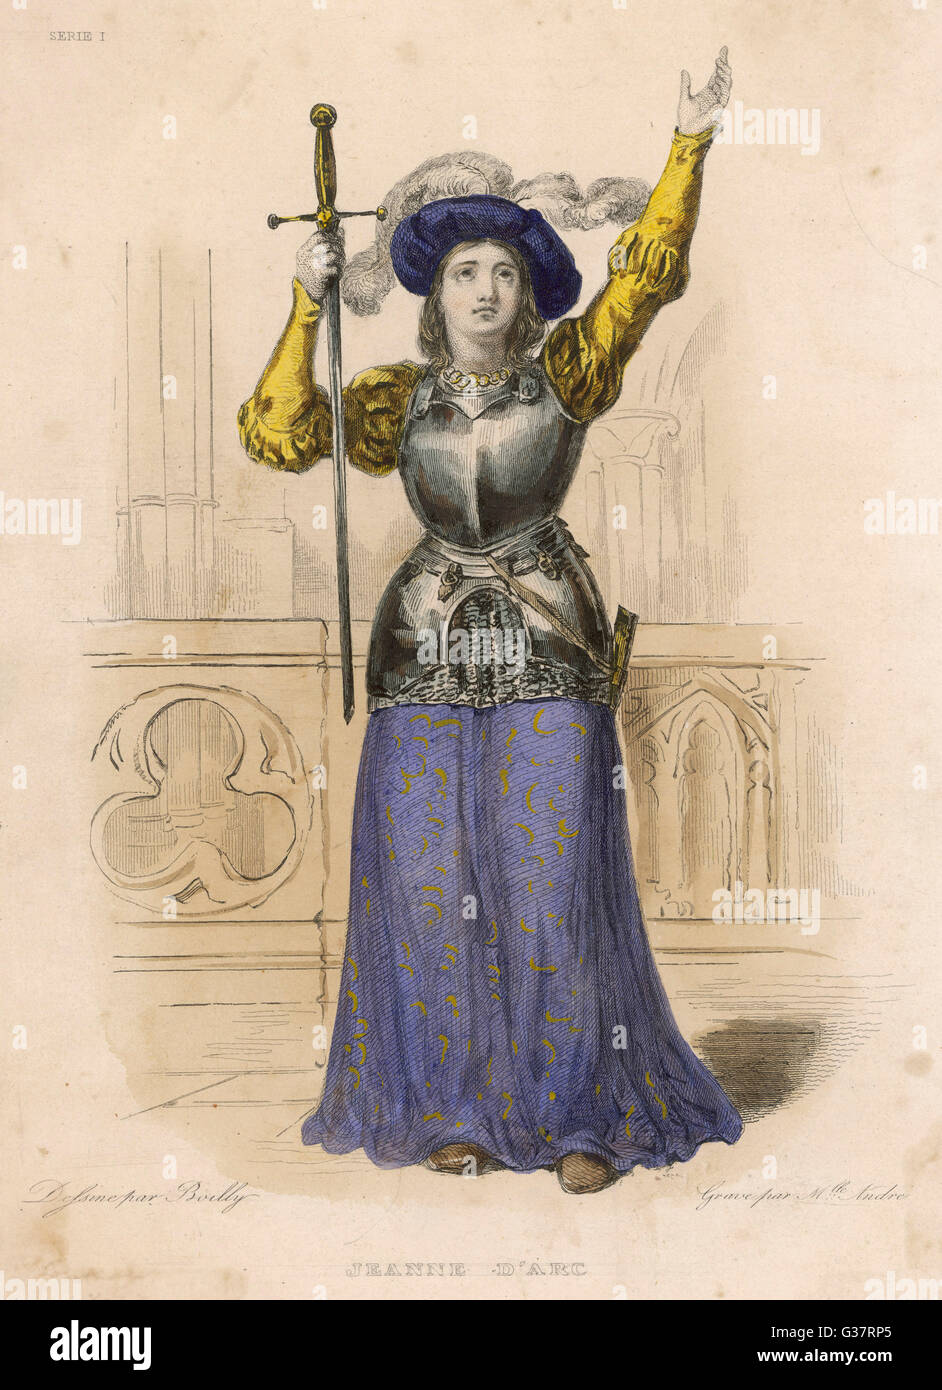 JOAN OF ARC Maid of Orleans  French national heroine       Date: 1412? - 1431 Stock Photo